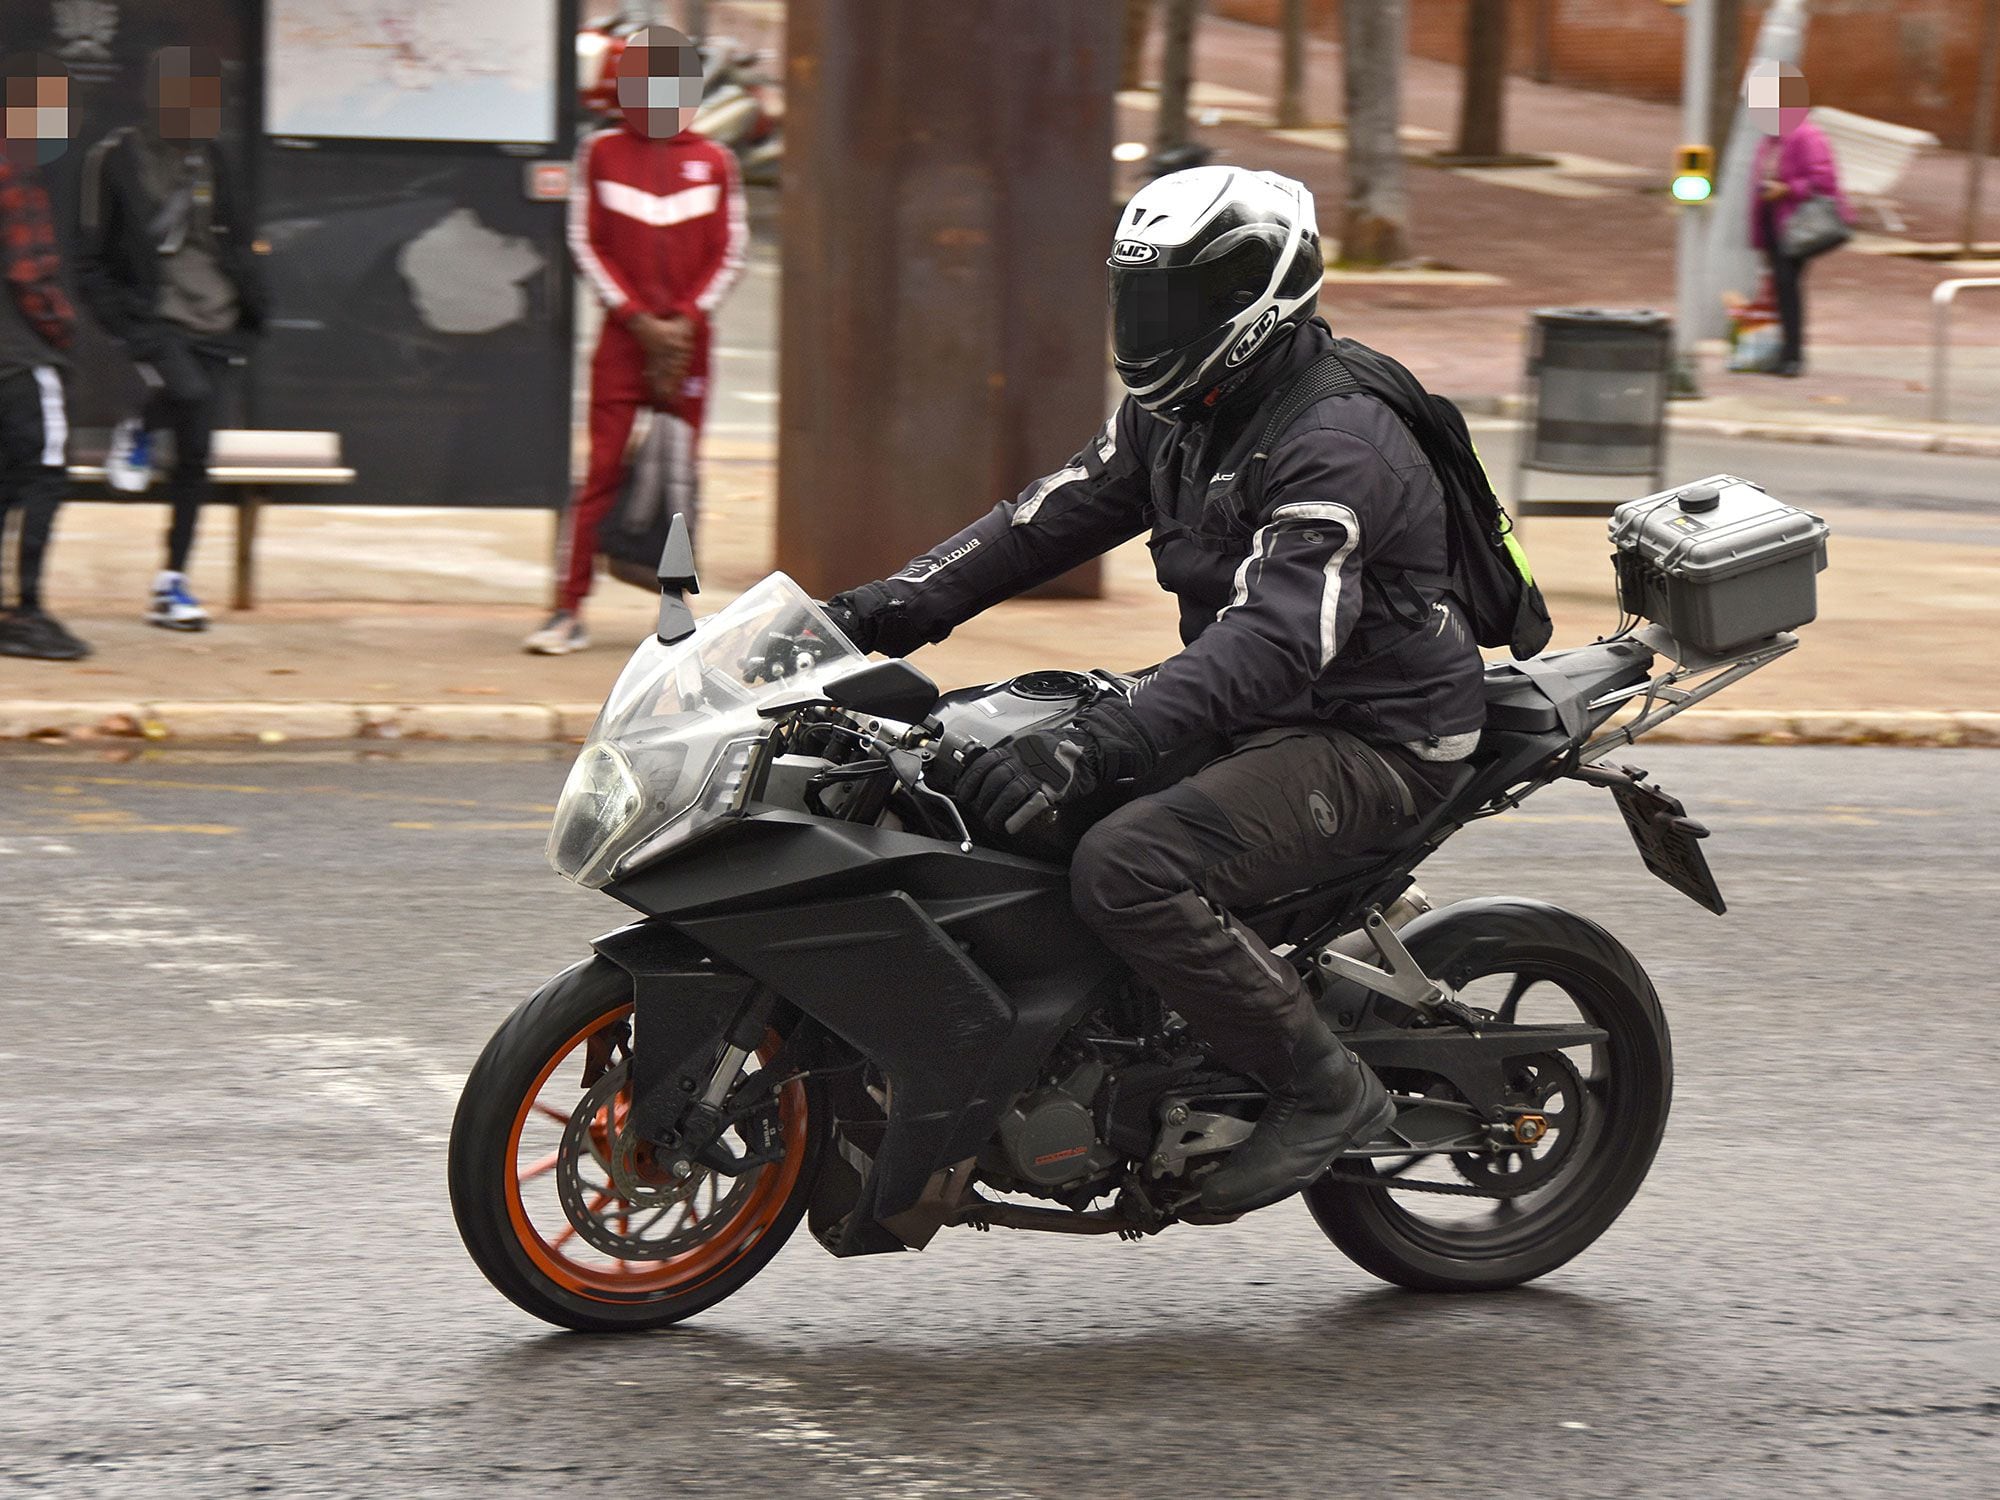 Spy shots of this revamped KTM RC 125 suggest the firm is working on an RC series overhaul.